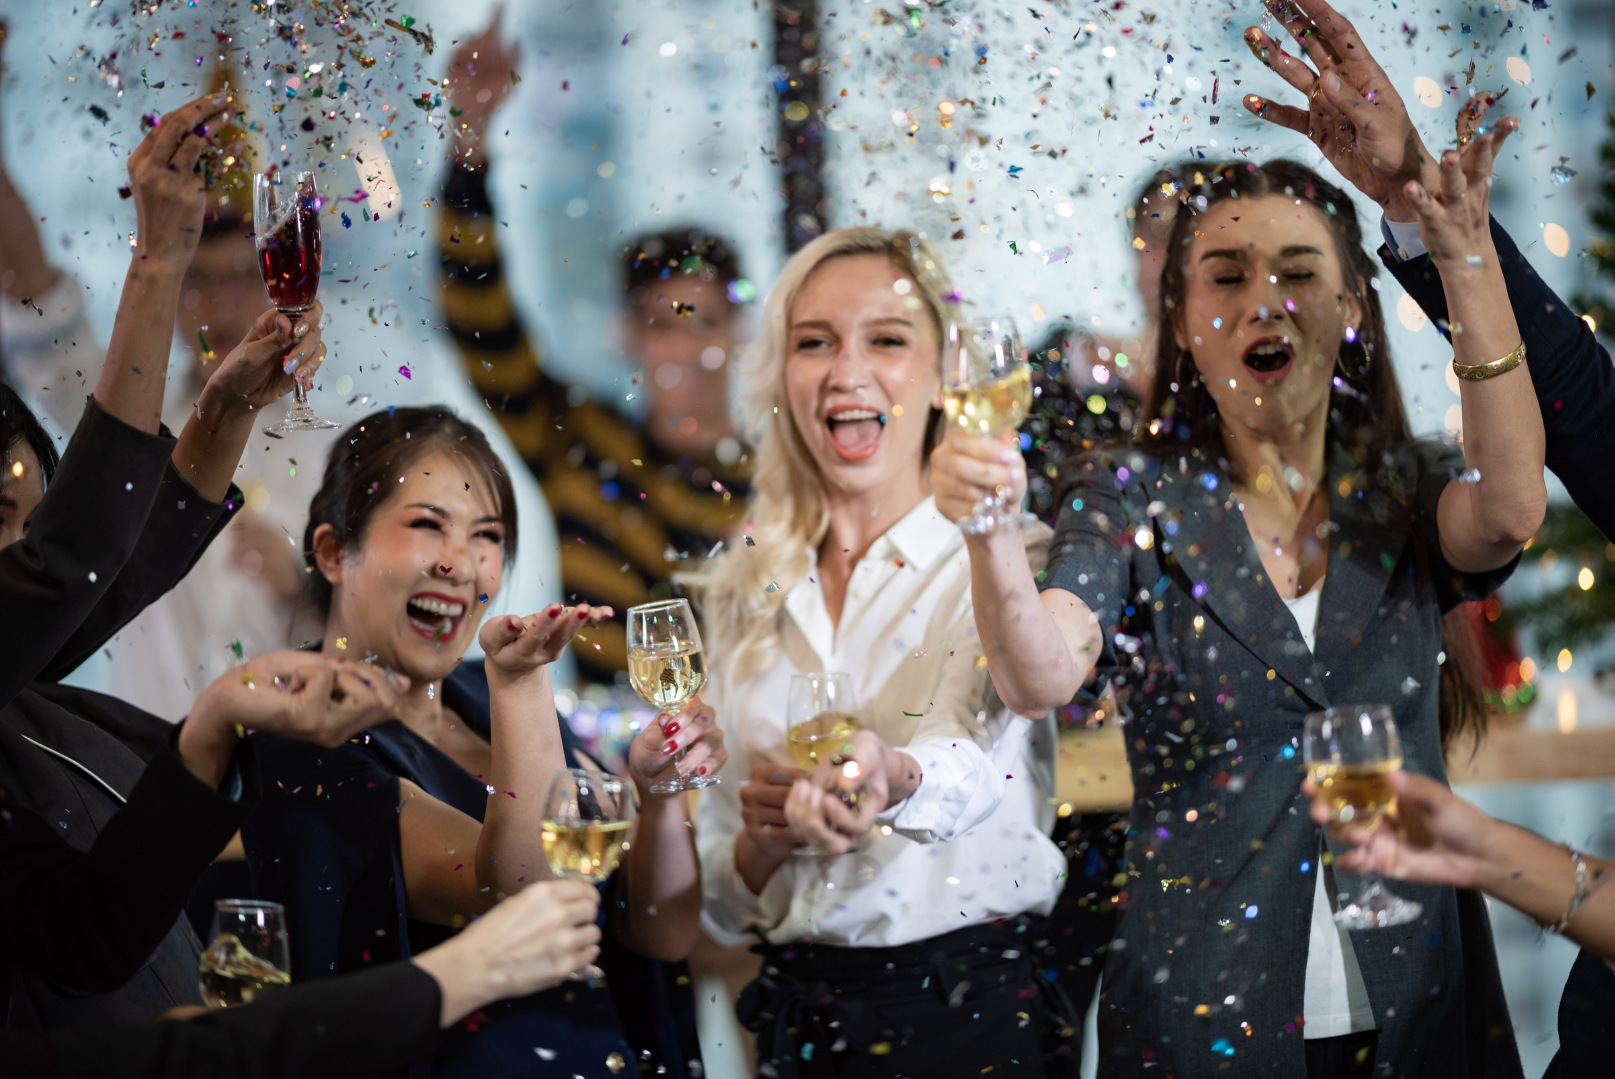 Employees having fun at a company holiday party throwing confetti drinking champagne